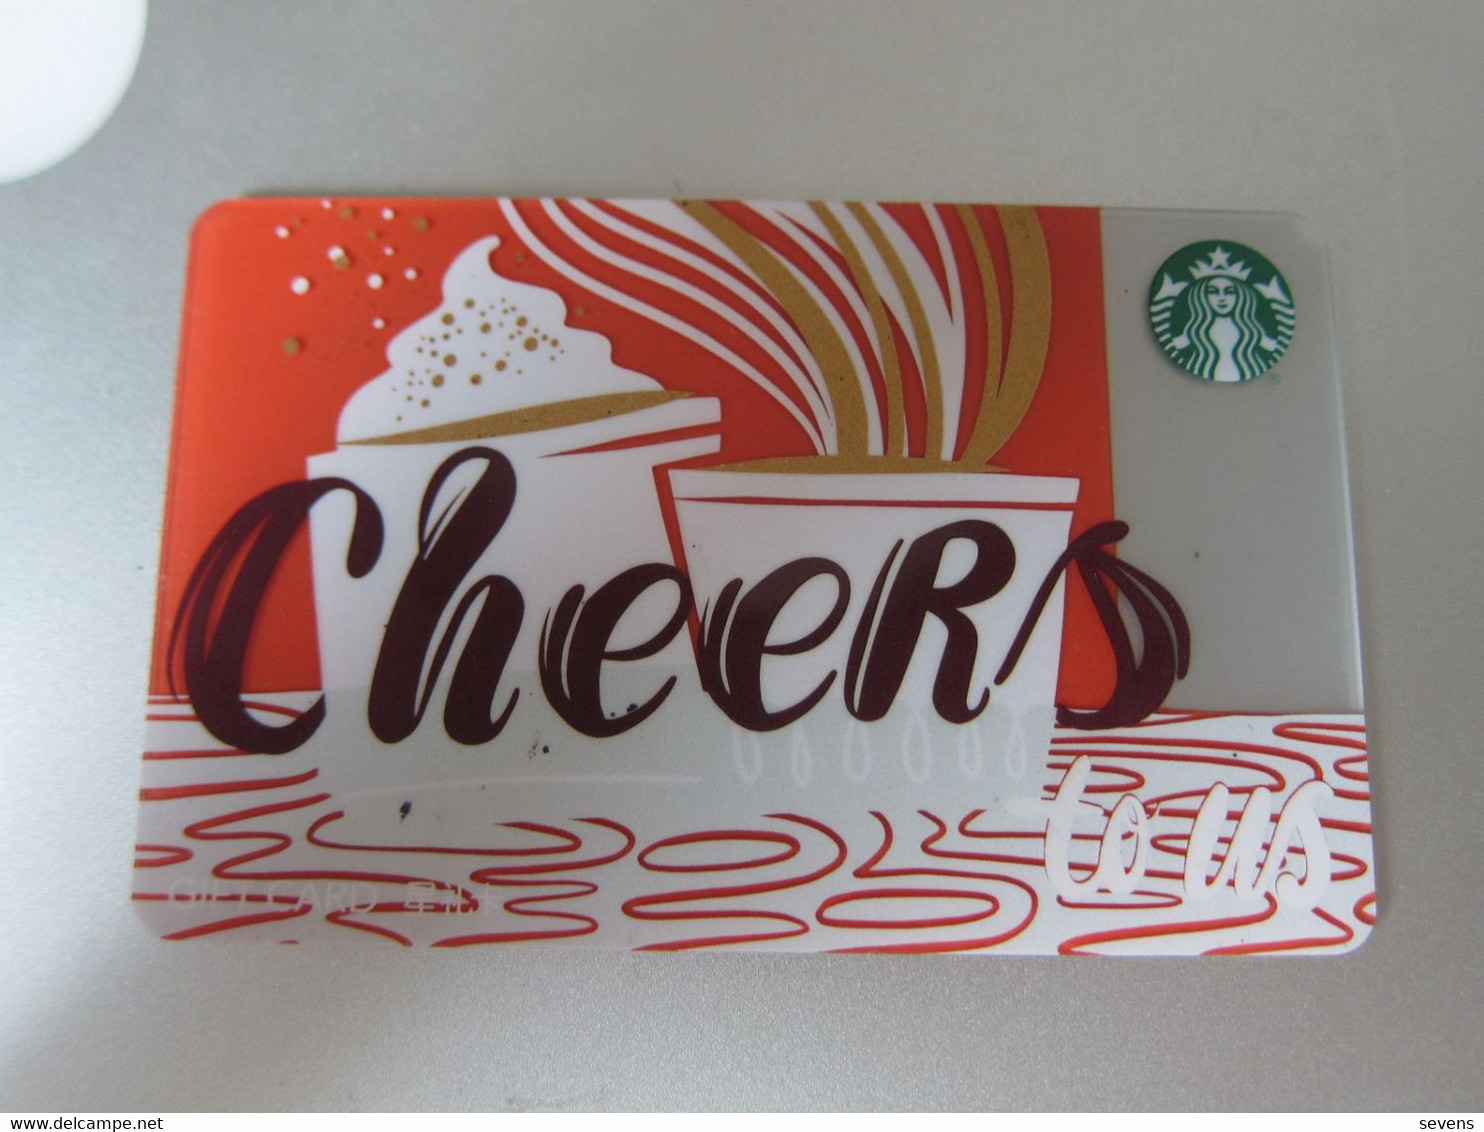 China Starbucks Gift Card, 2020 Cheers,used,code 01 - Gift Cards